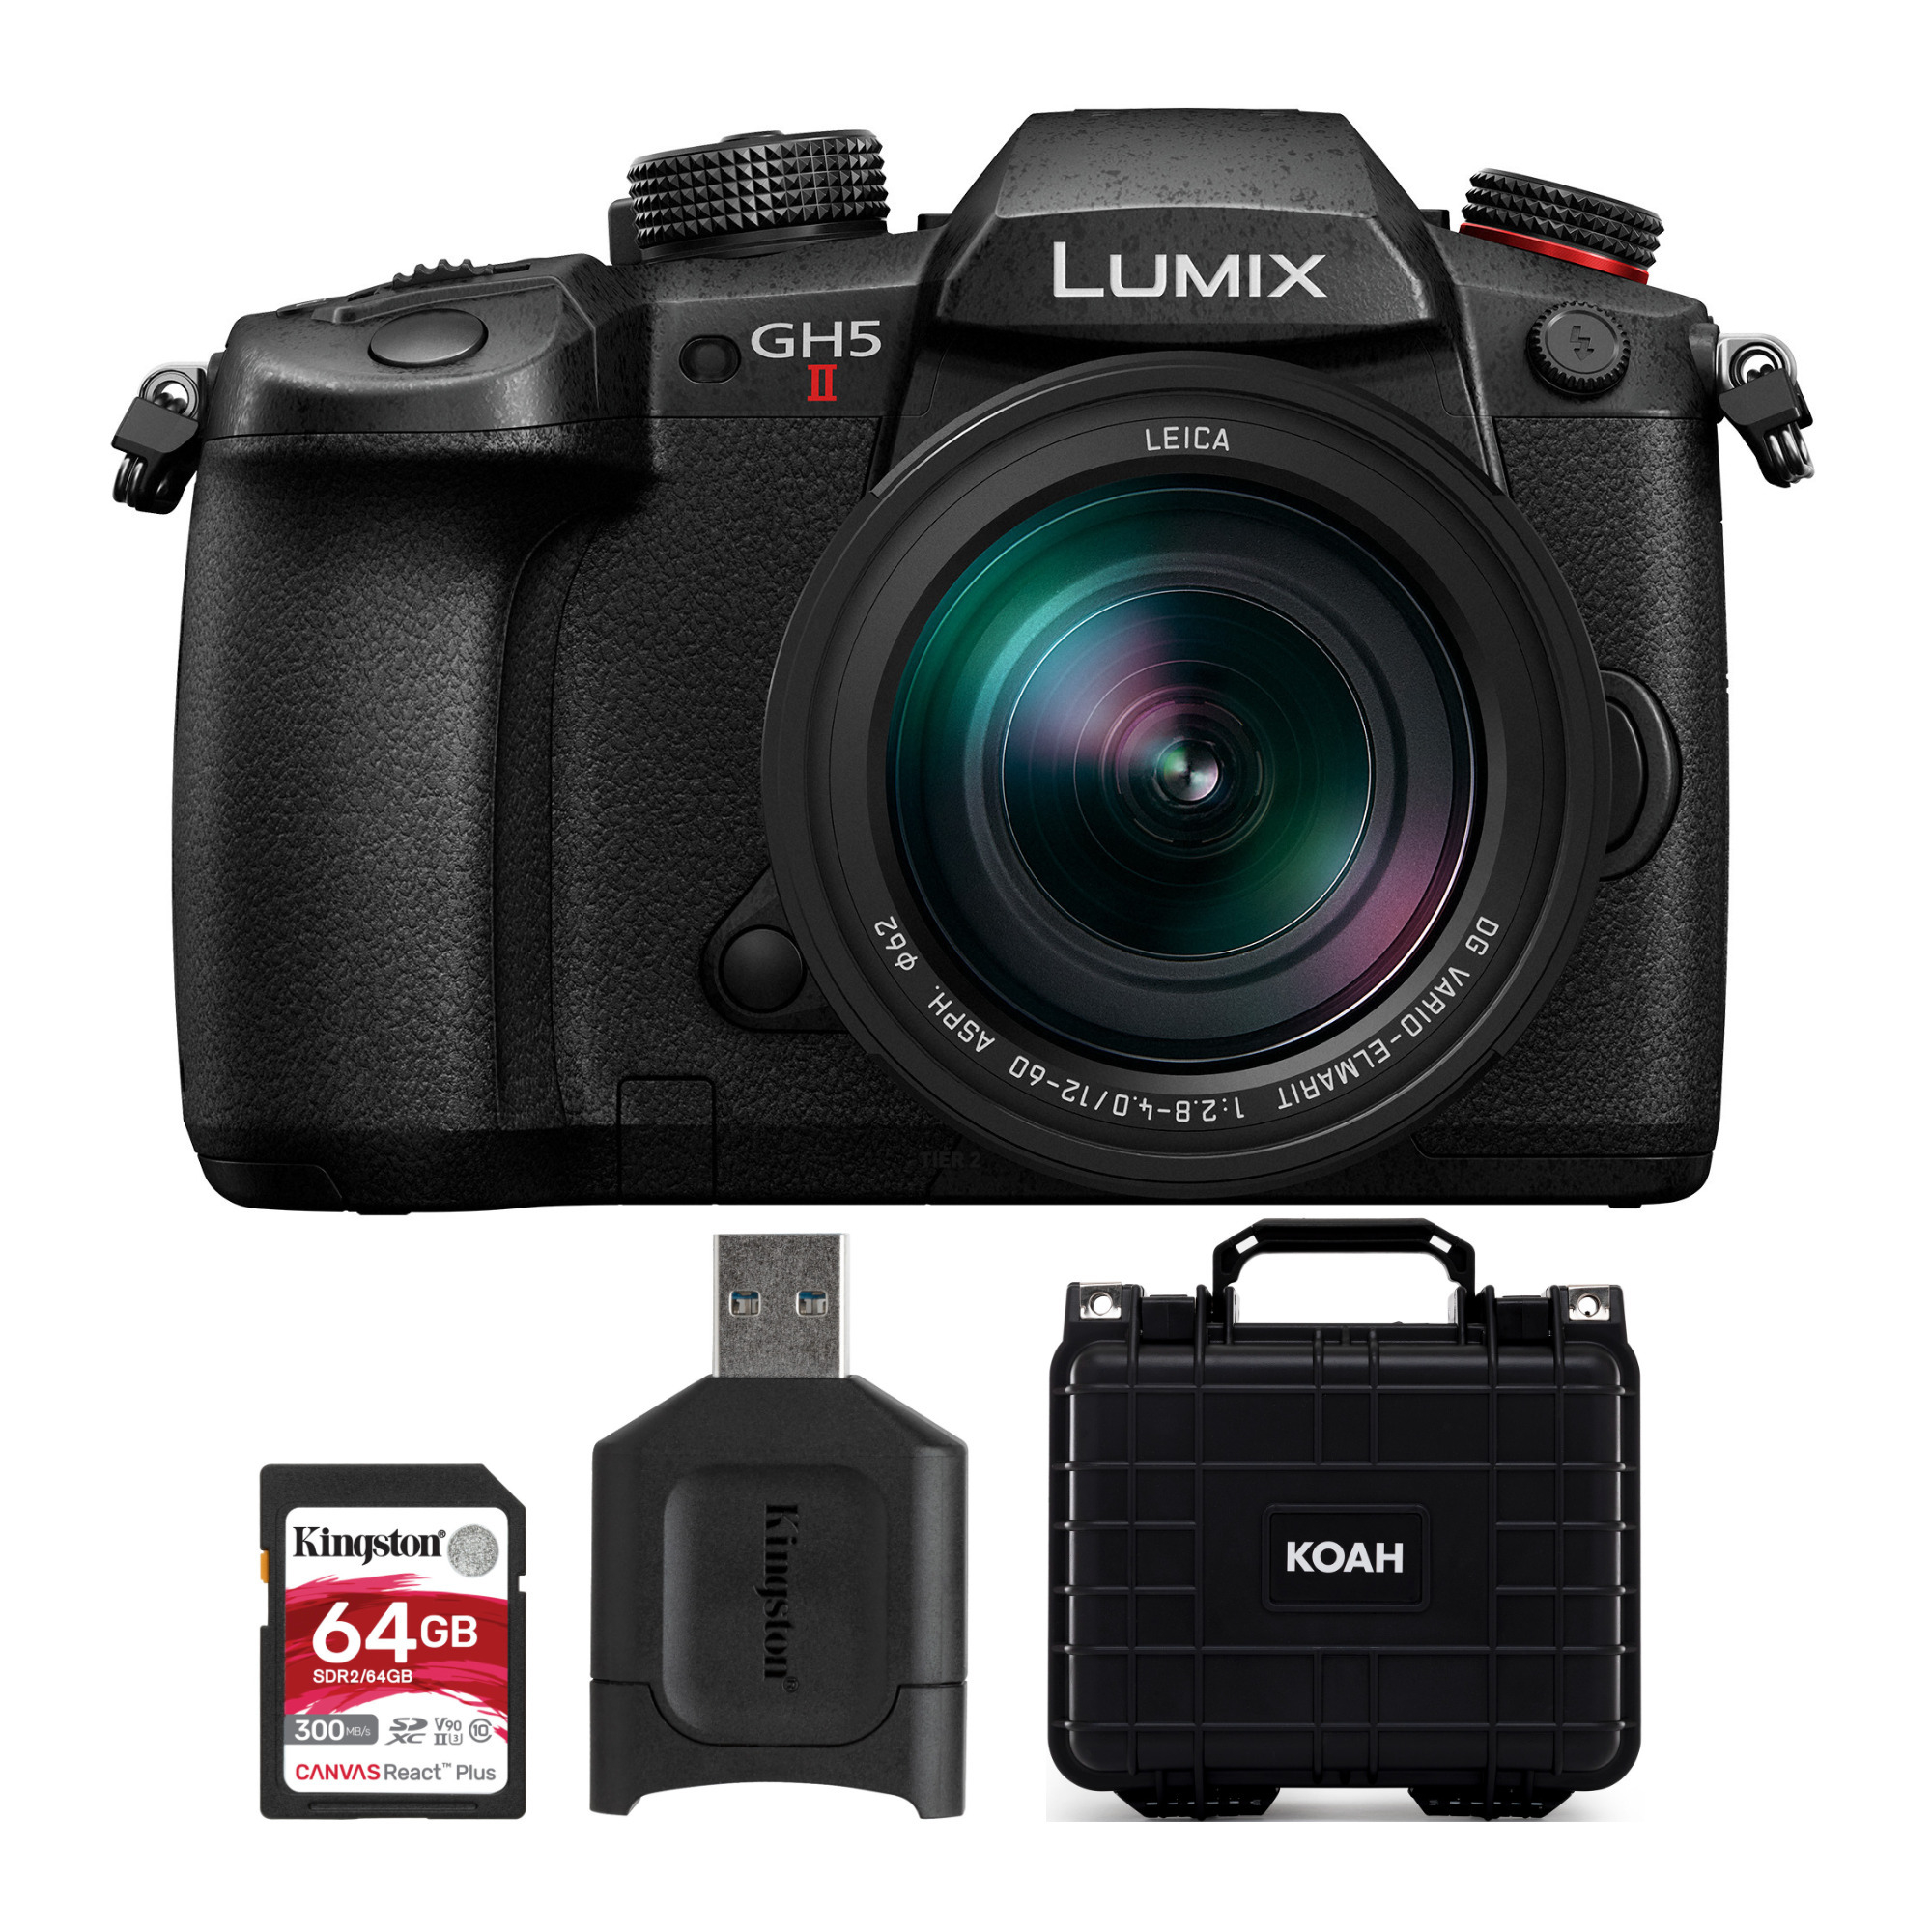 Panasonic Lumix GH5 II Mirrorless Camera with 12-60mm f/2.8-4 Lens, 64GB Memory Card and Hard Case in Black